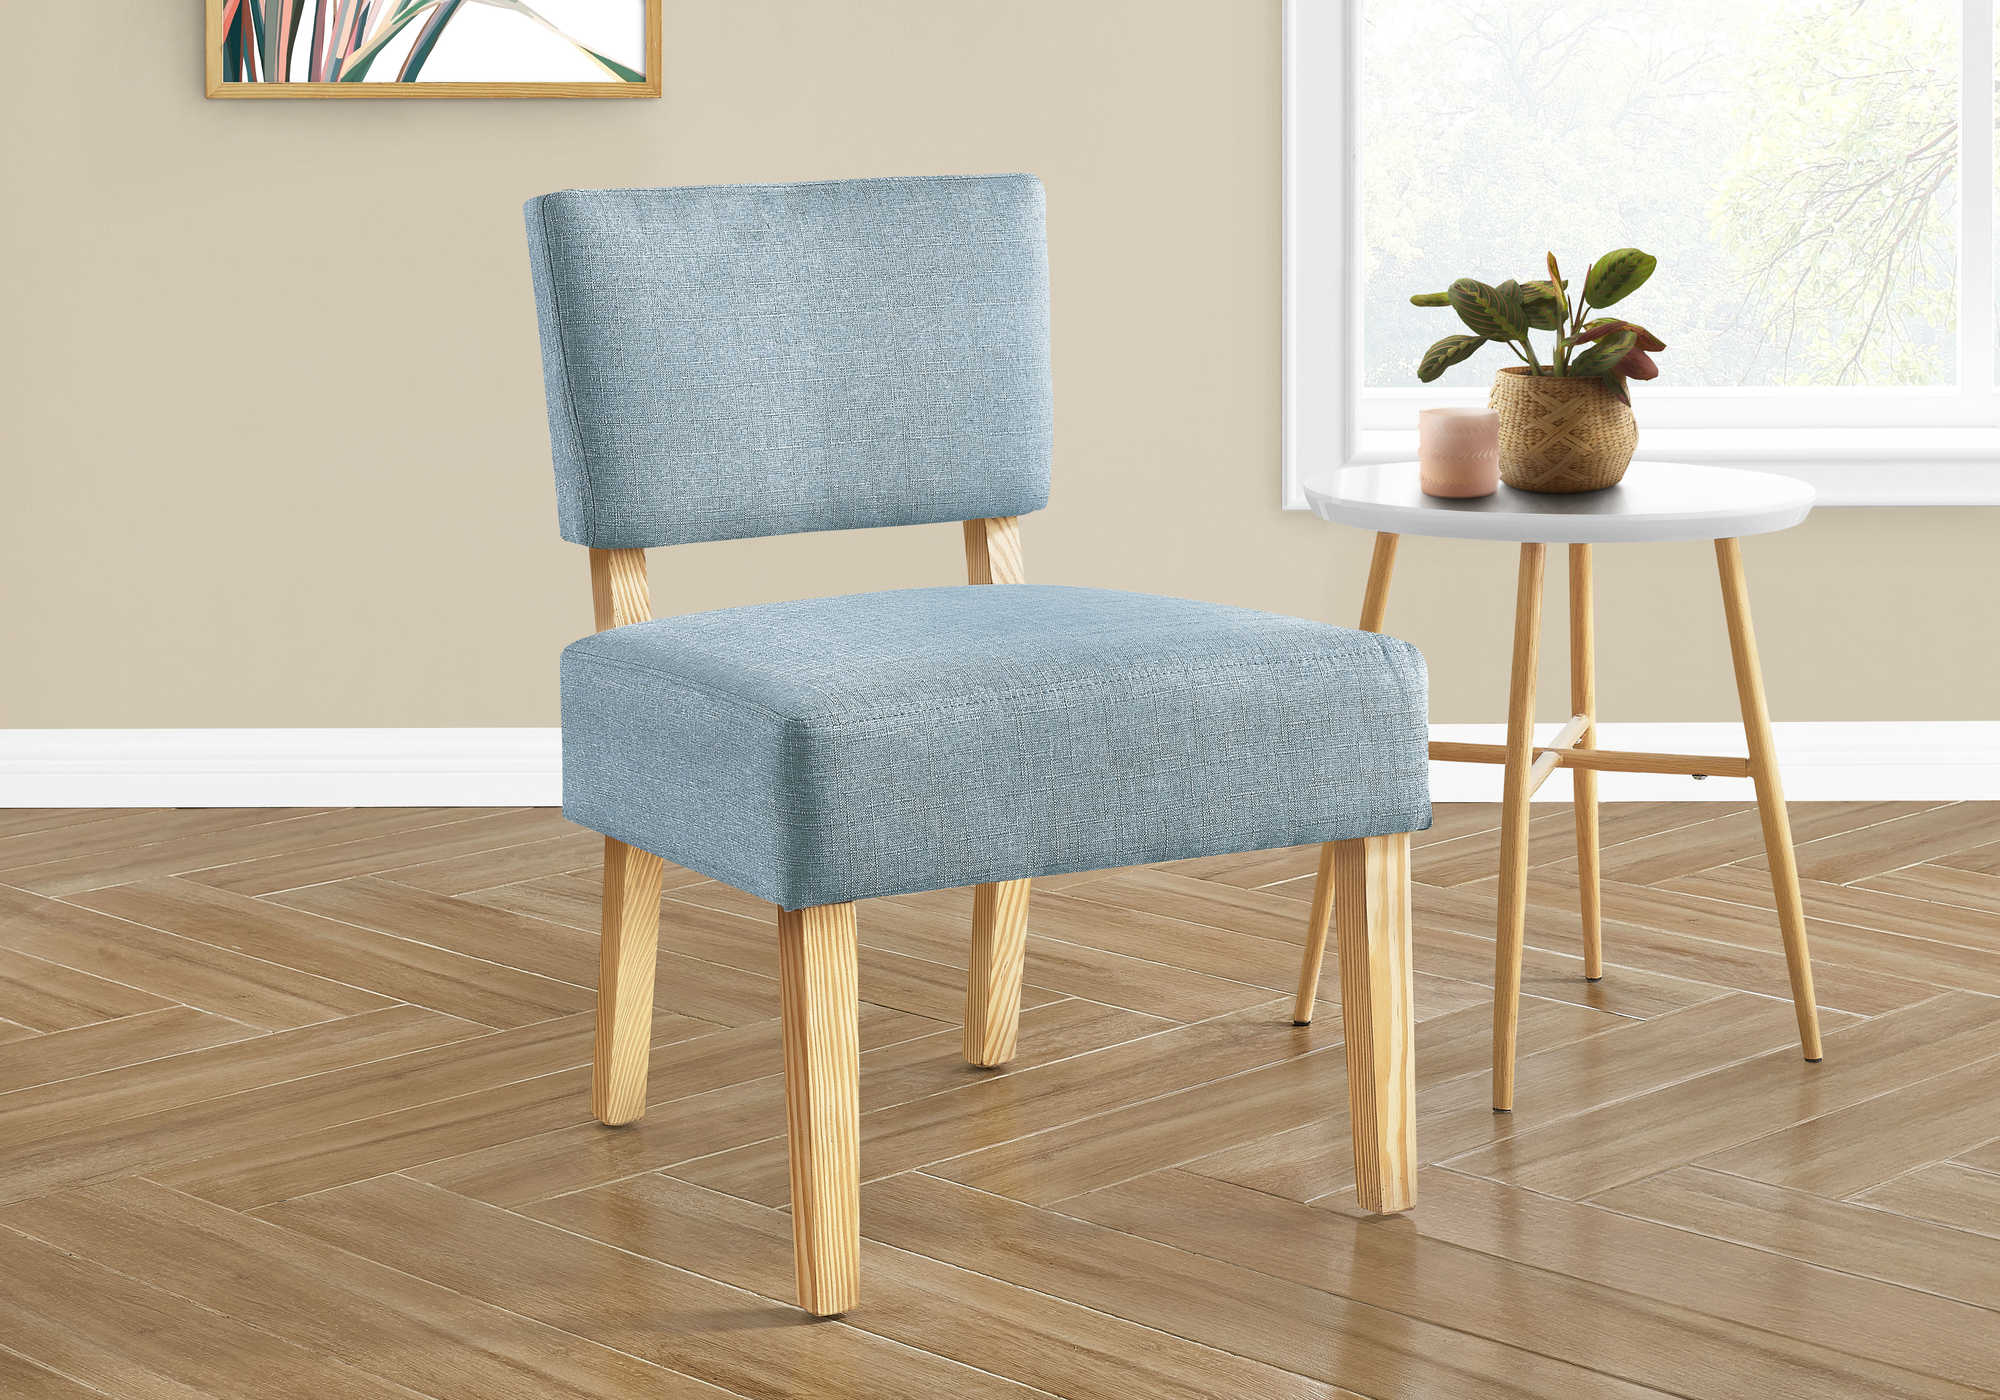 ACCENT CHAIR - LIGHT BLUE FABRIC / NATURAL WOOD LEGS